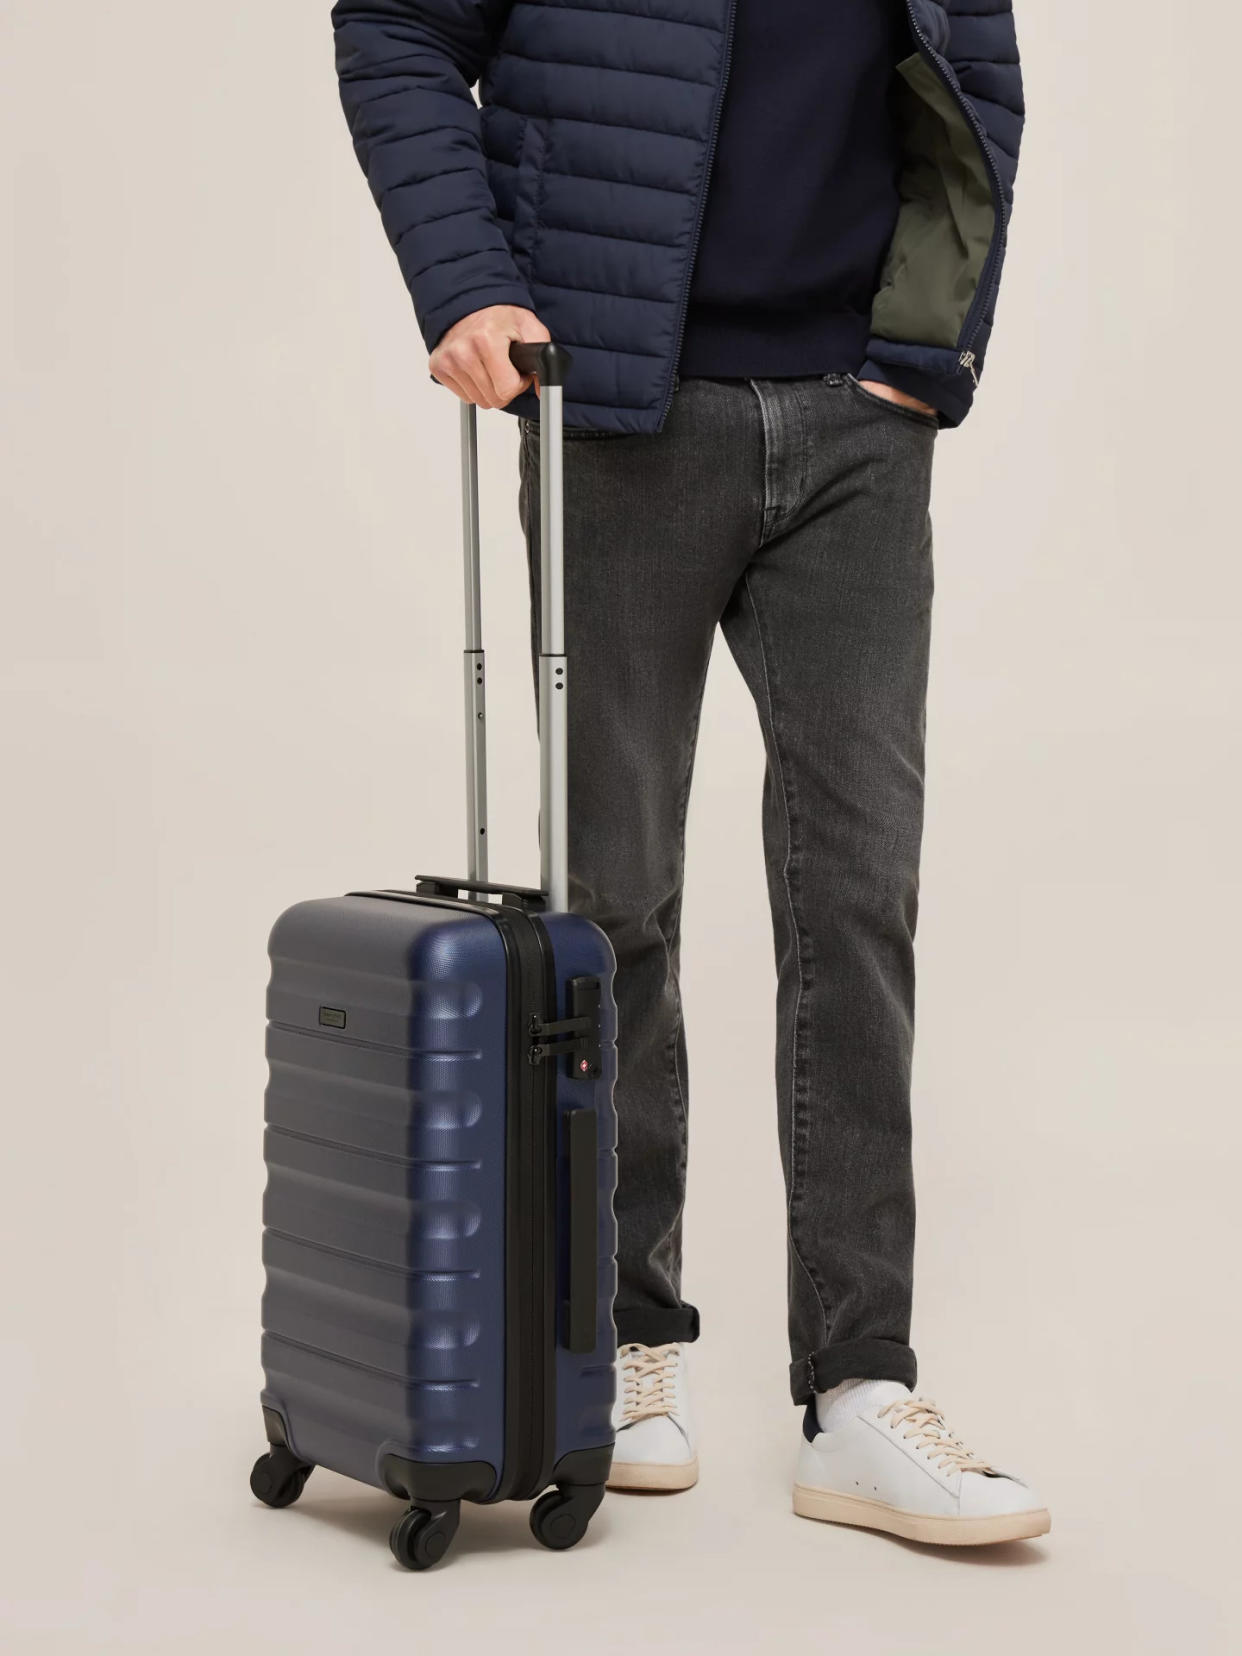 Shop the best-selling suitcase in a range of four colours: black, grey, navy and red. (John Lewis)